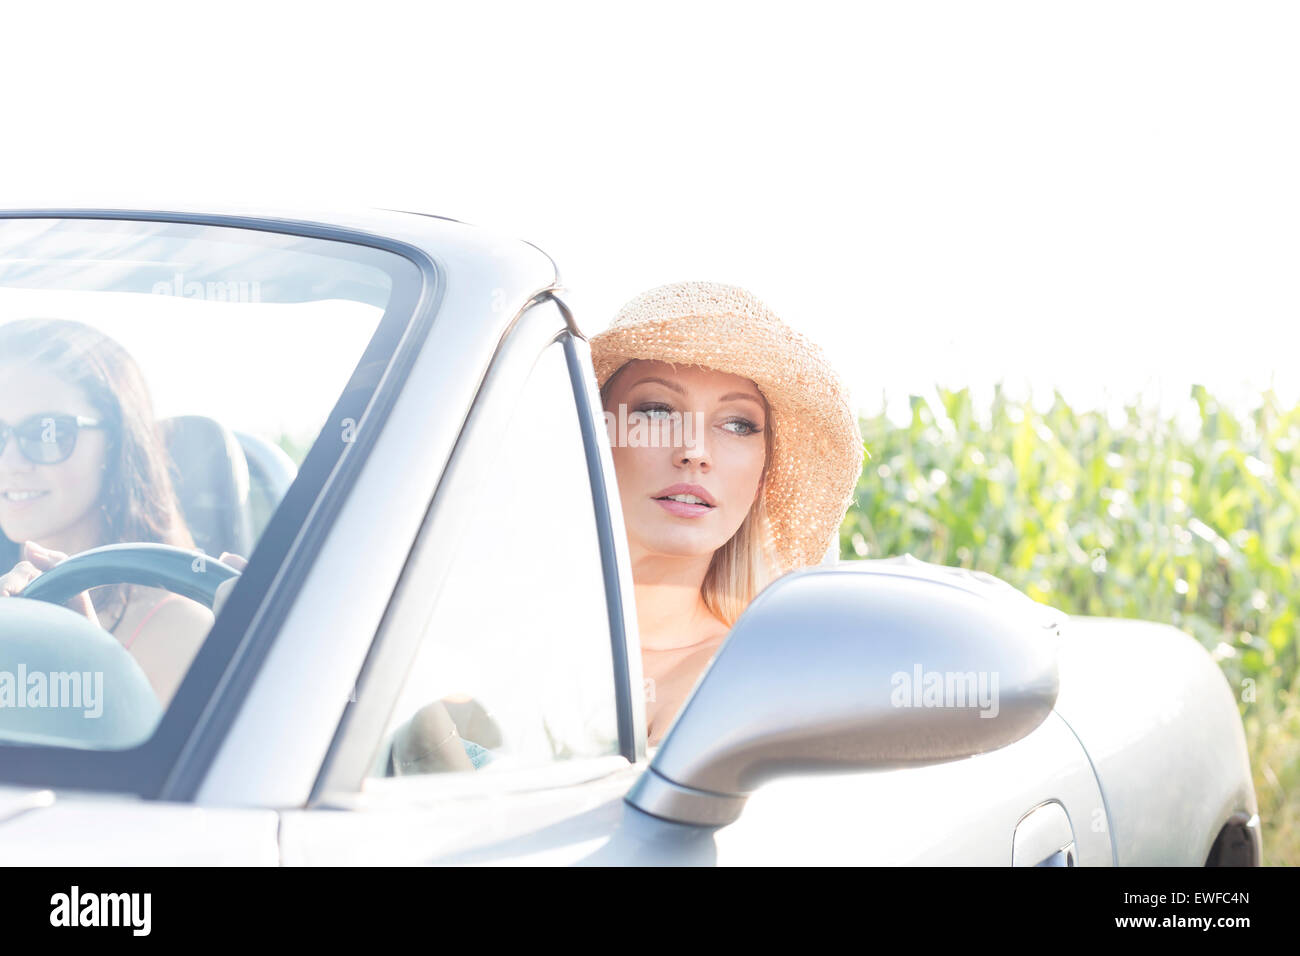 Woman sitting in convertible avec amie sur sunny day Banque D'Images